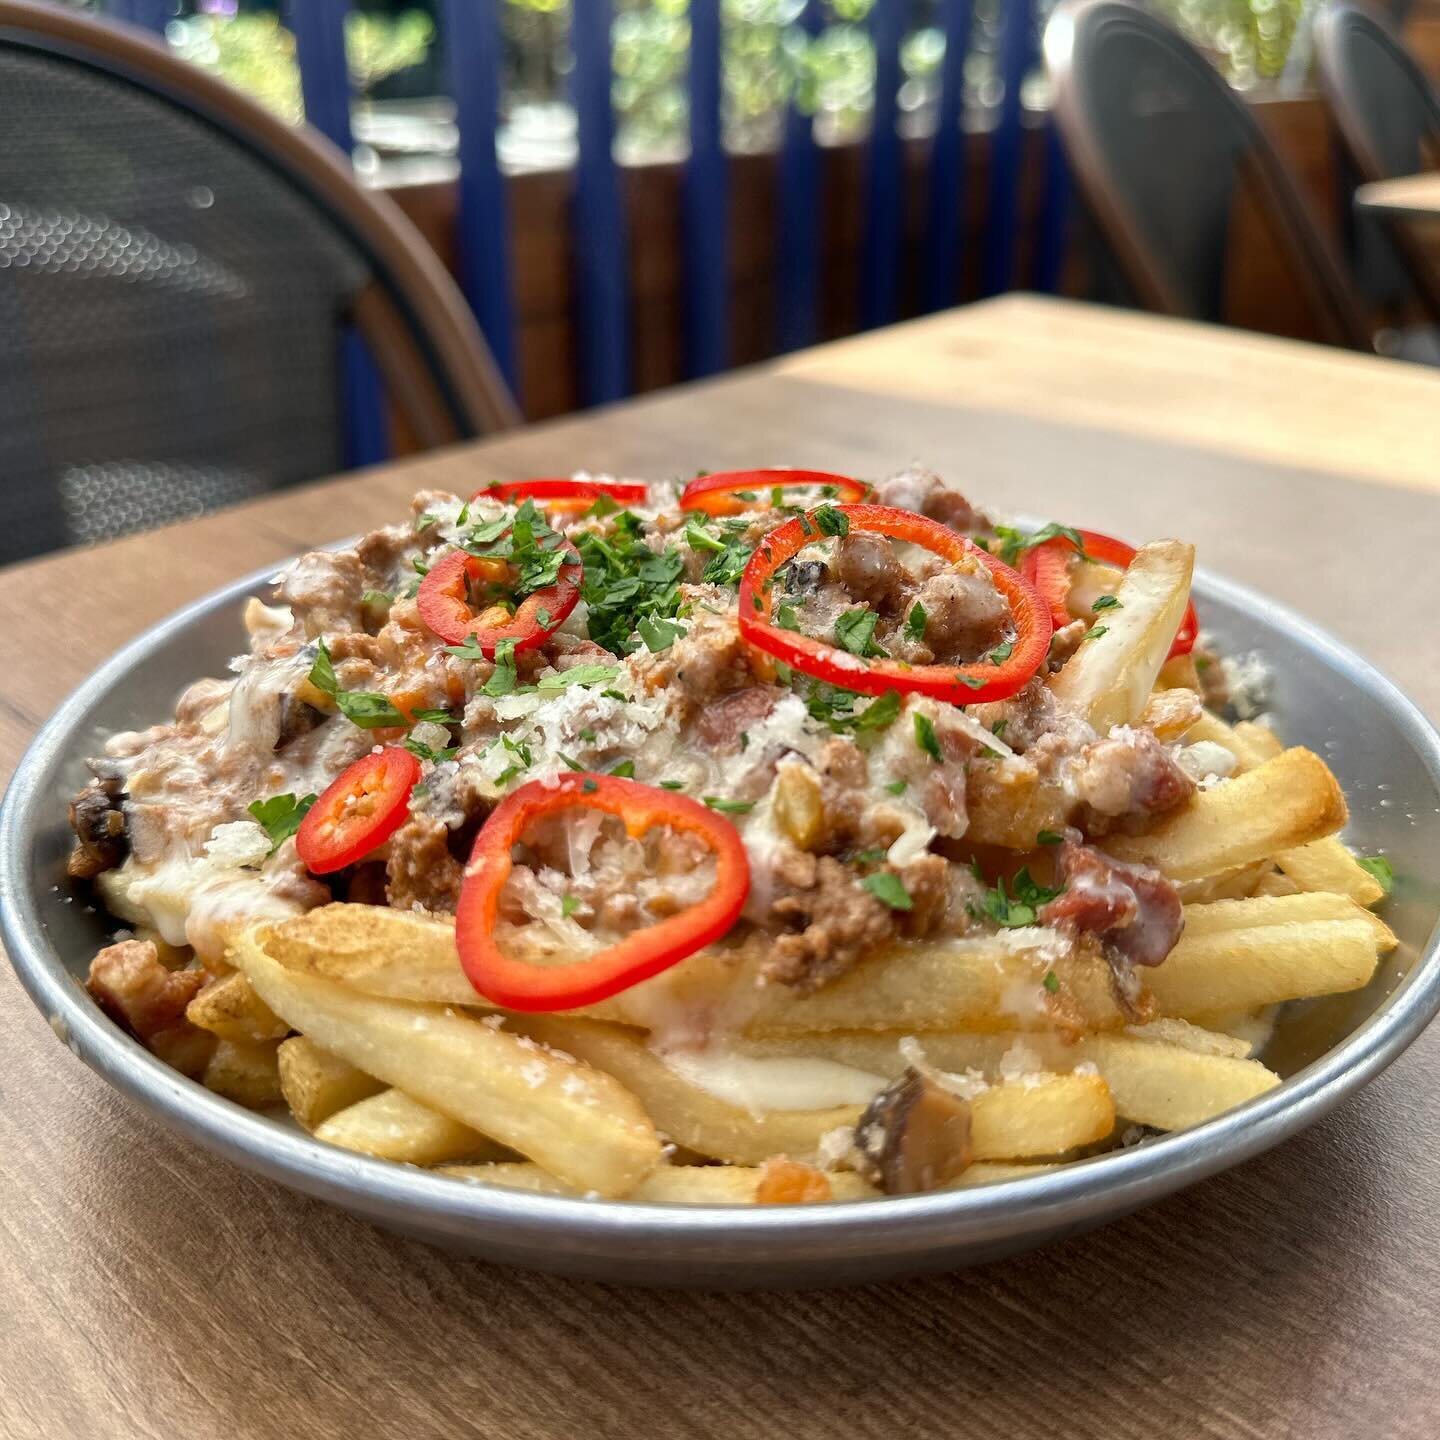 ALL DAY Game Day Specials at the bar!
*Loaded fries with @chefstevesamson &lsquo;s famous bolognese $8
*Meatball sliders $8
*House-battered fried chicken sandwich $12
*All beers $7
*Margaritas $11